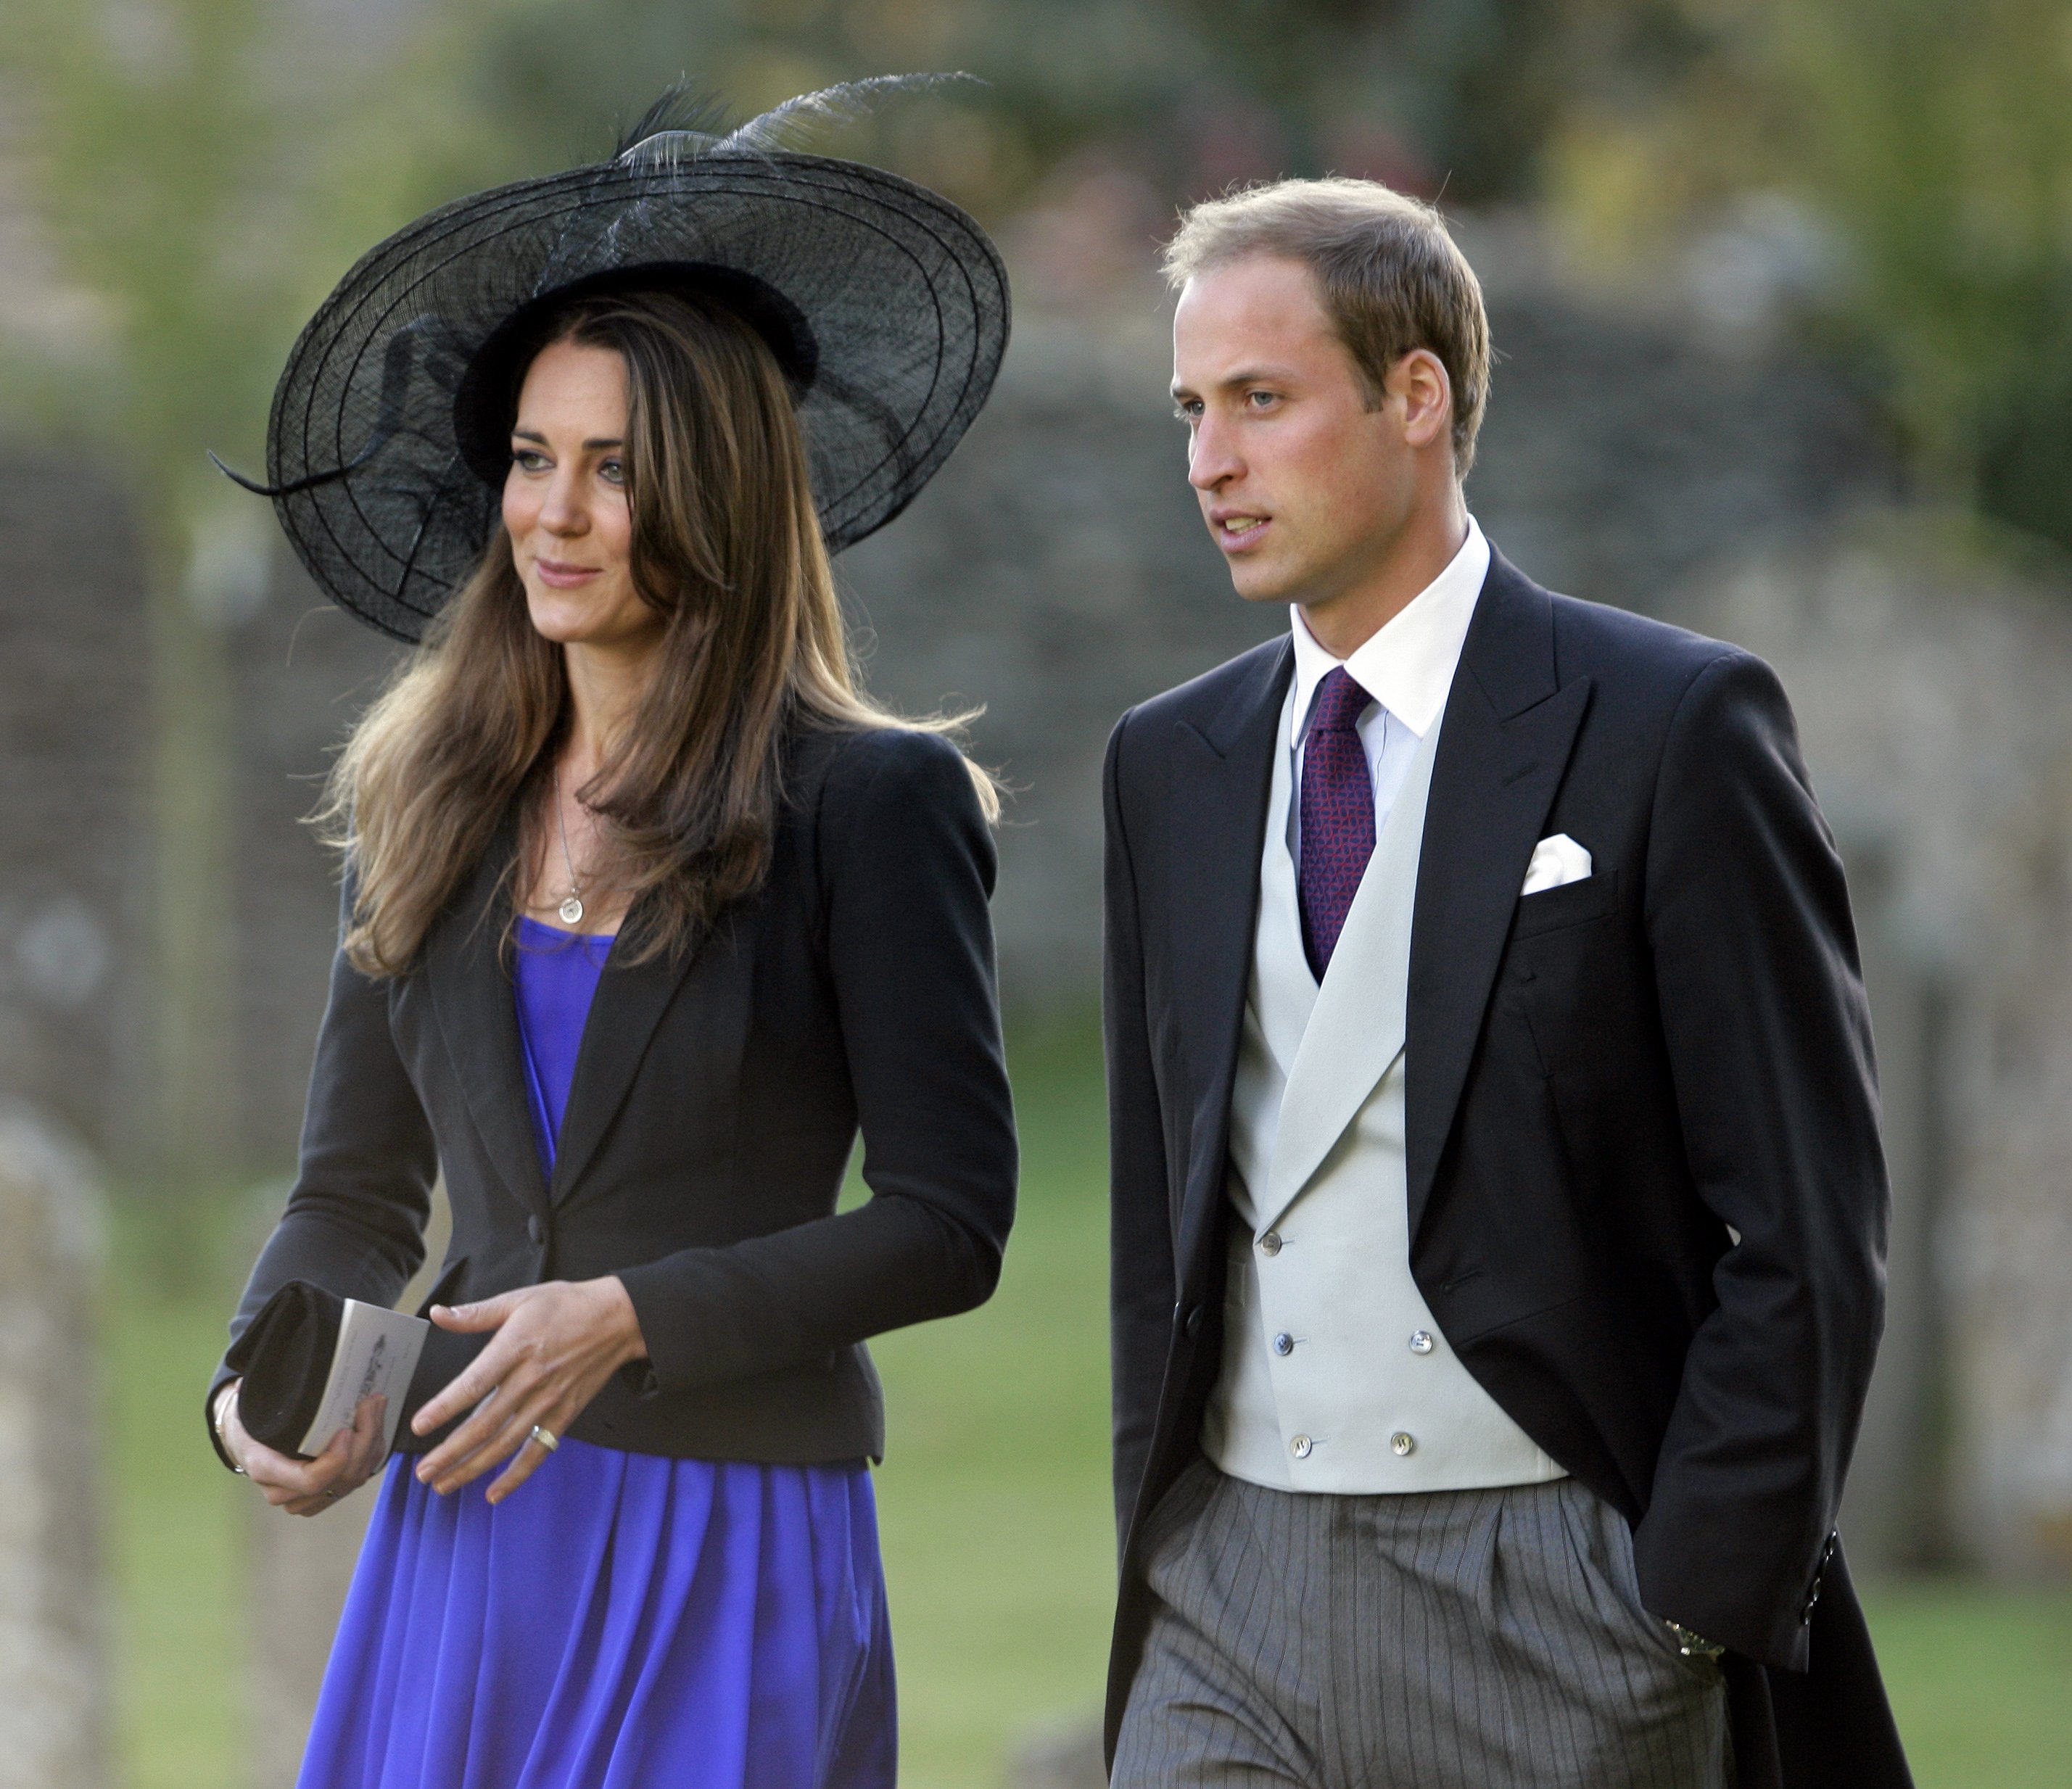 Kate Middleton and Prince William at Harry Meade & Rosie Bradford's wedding on October 23, 2010 | Source: Getty Images